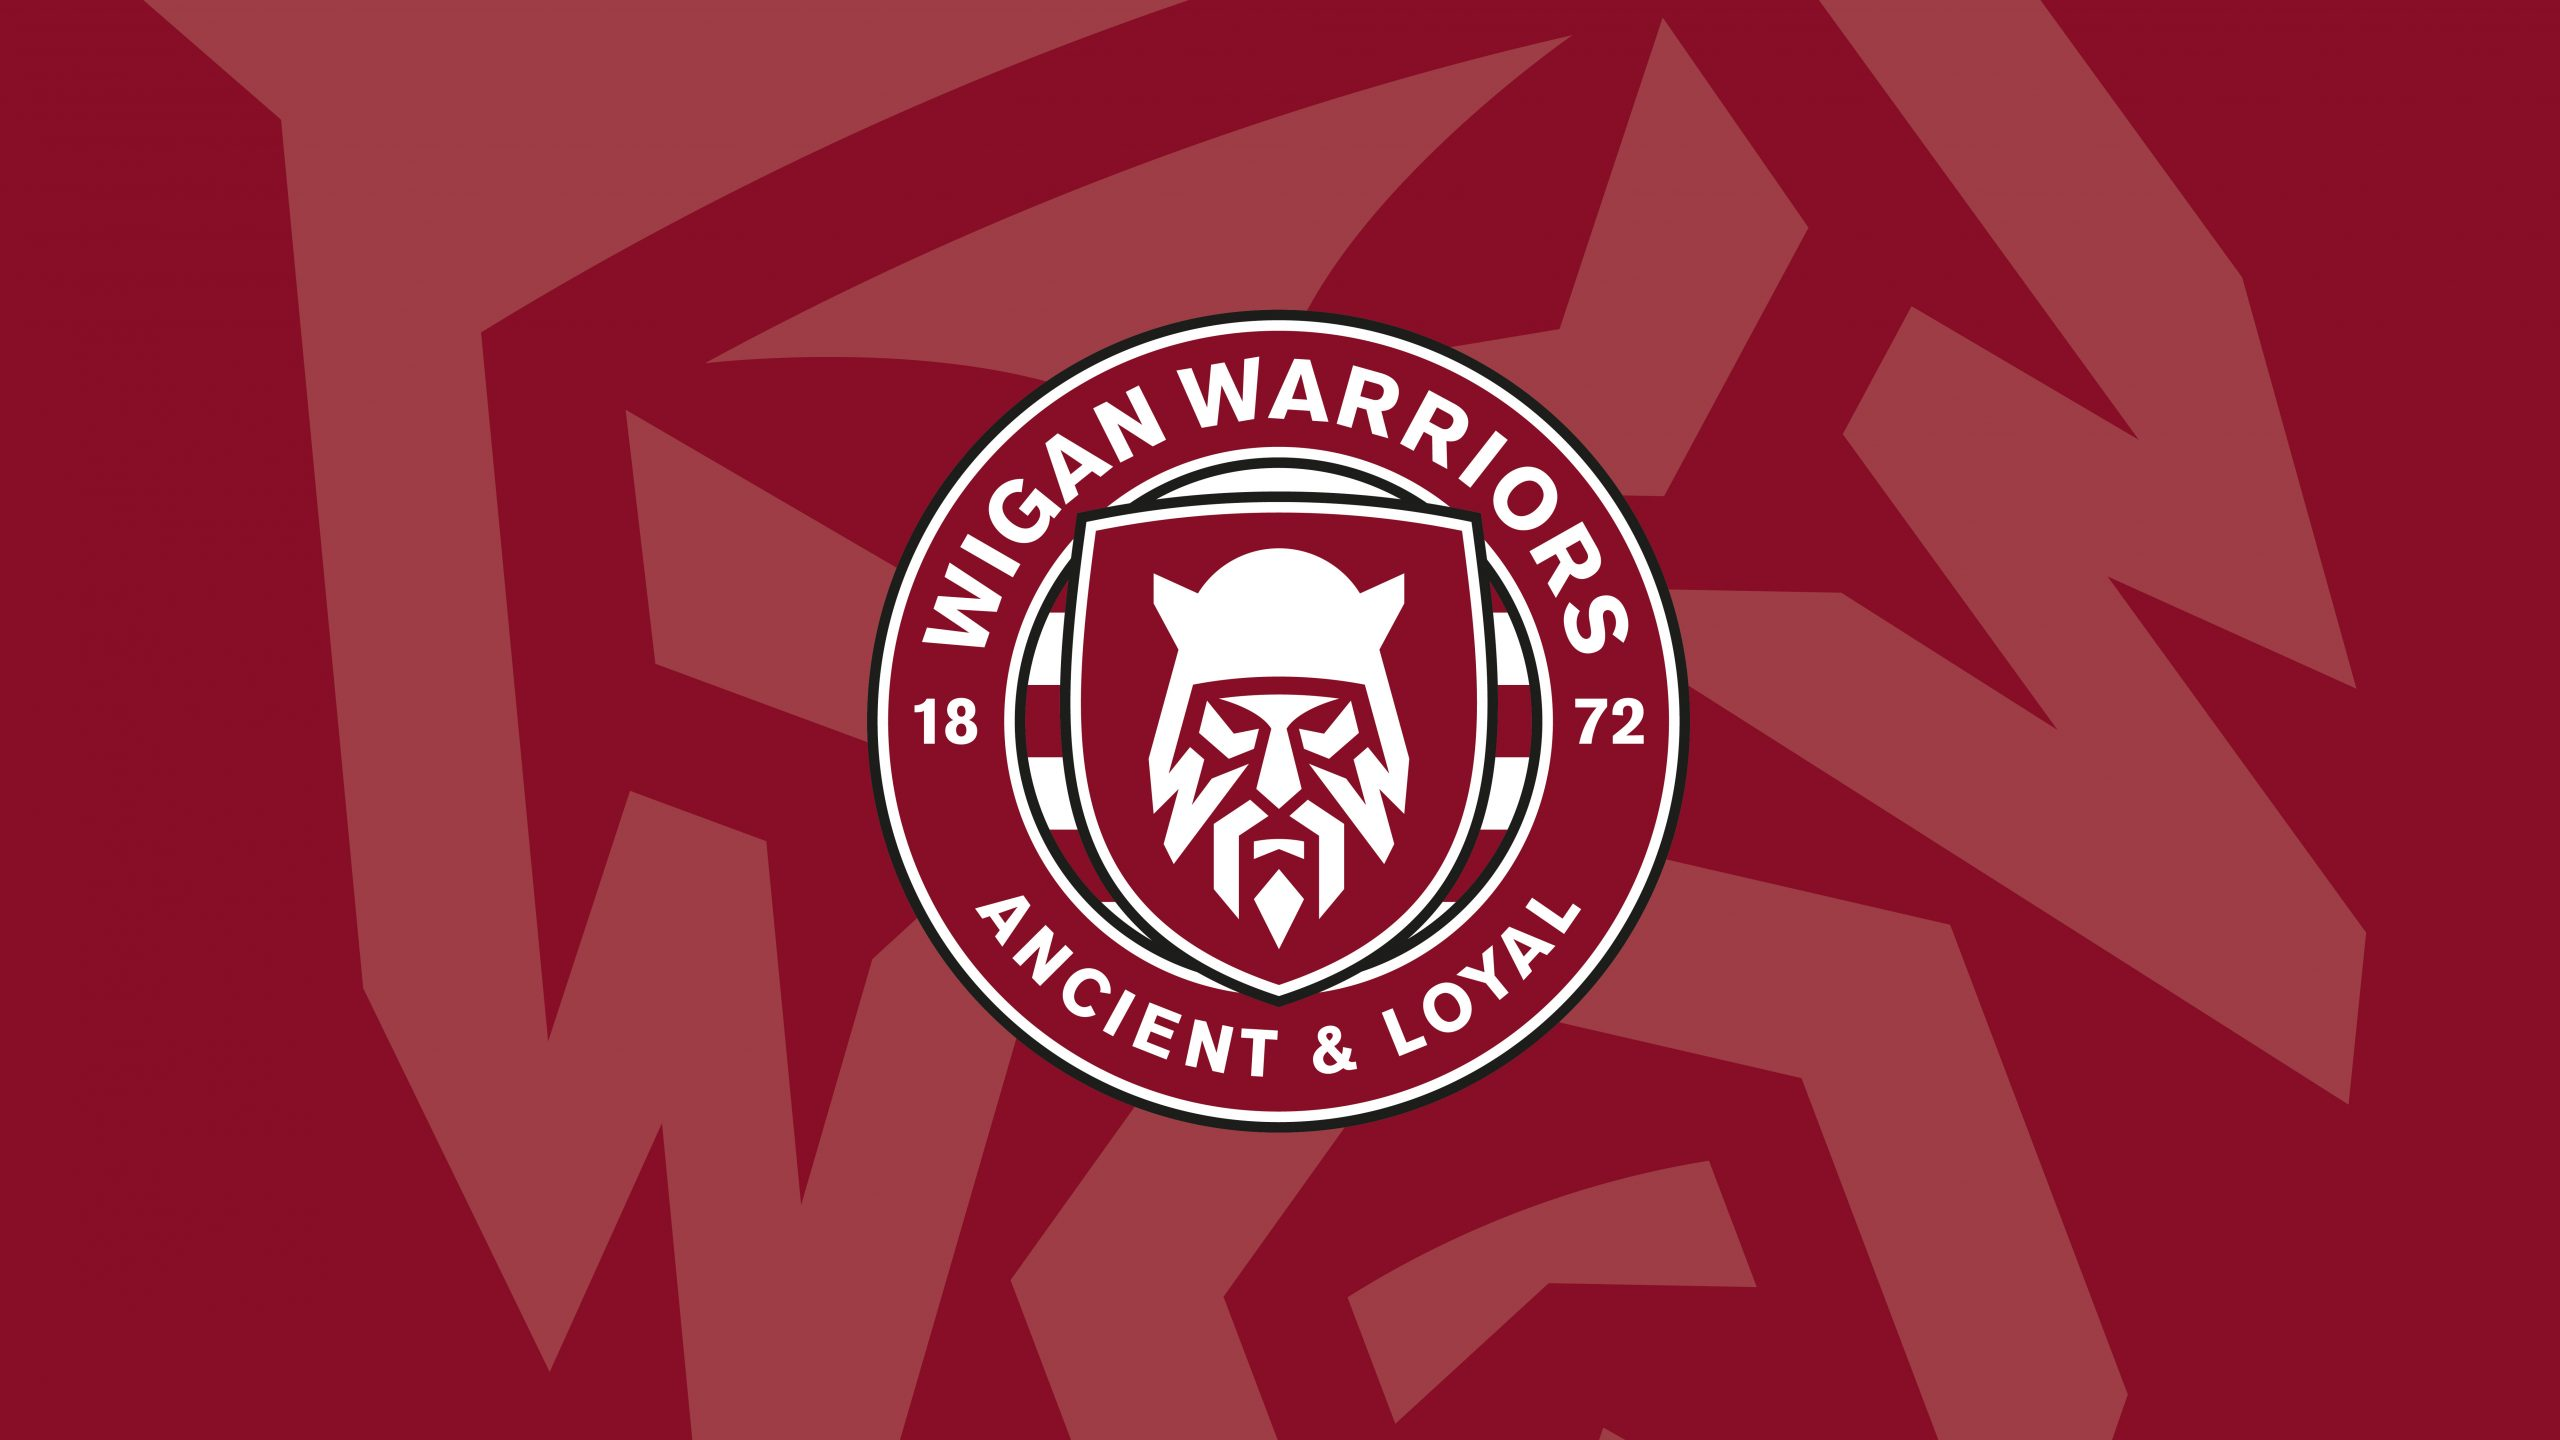 Wigan Warriors logo with a backdrop containing elements of the logo